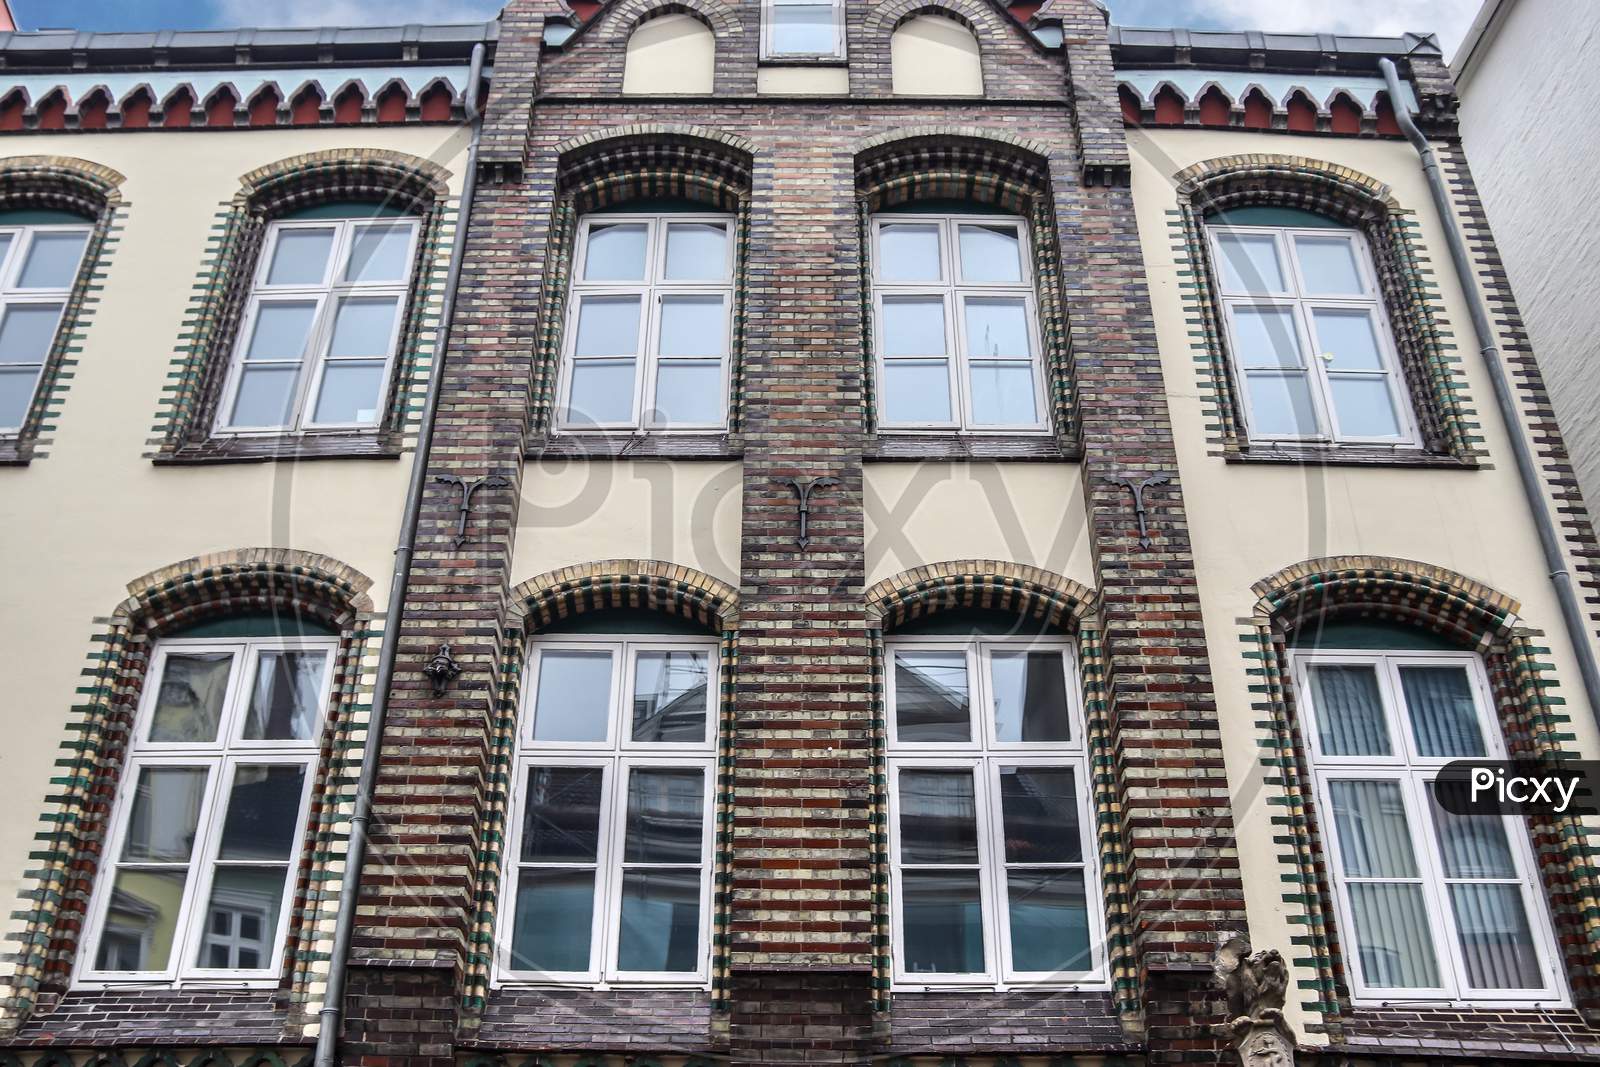 Beautiful old architecture of facades found in the small town Flensburg in northern Germany